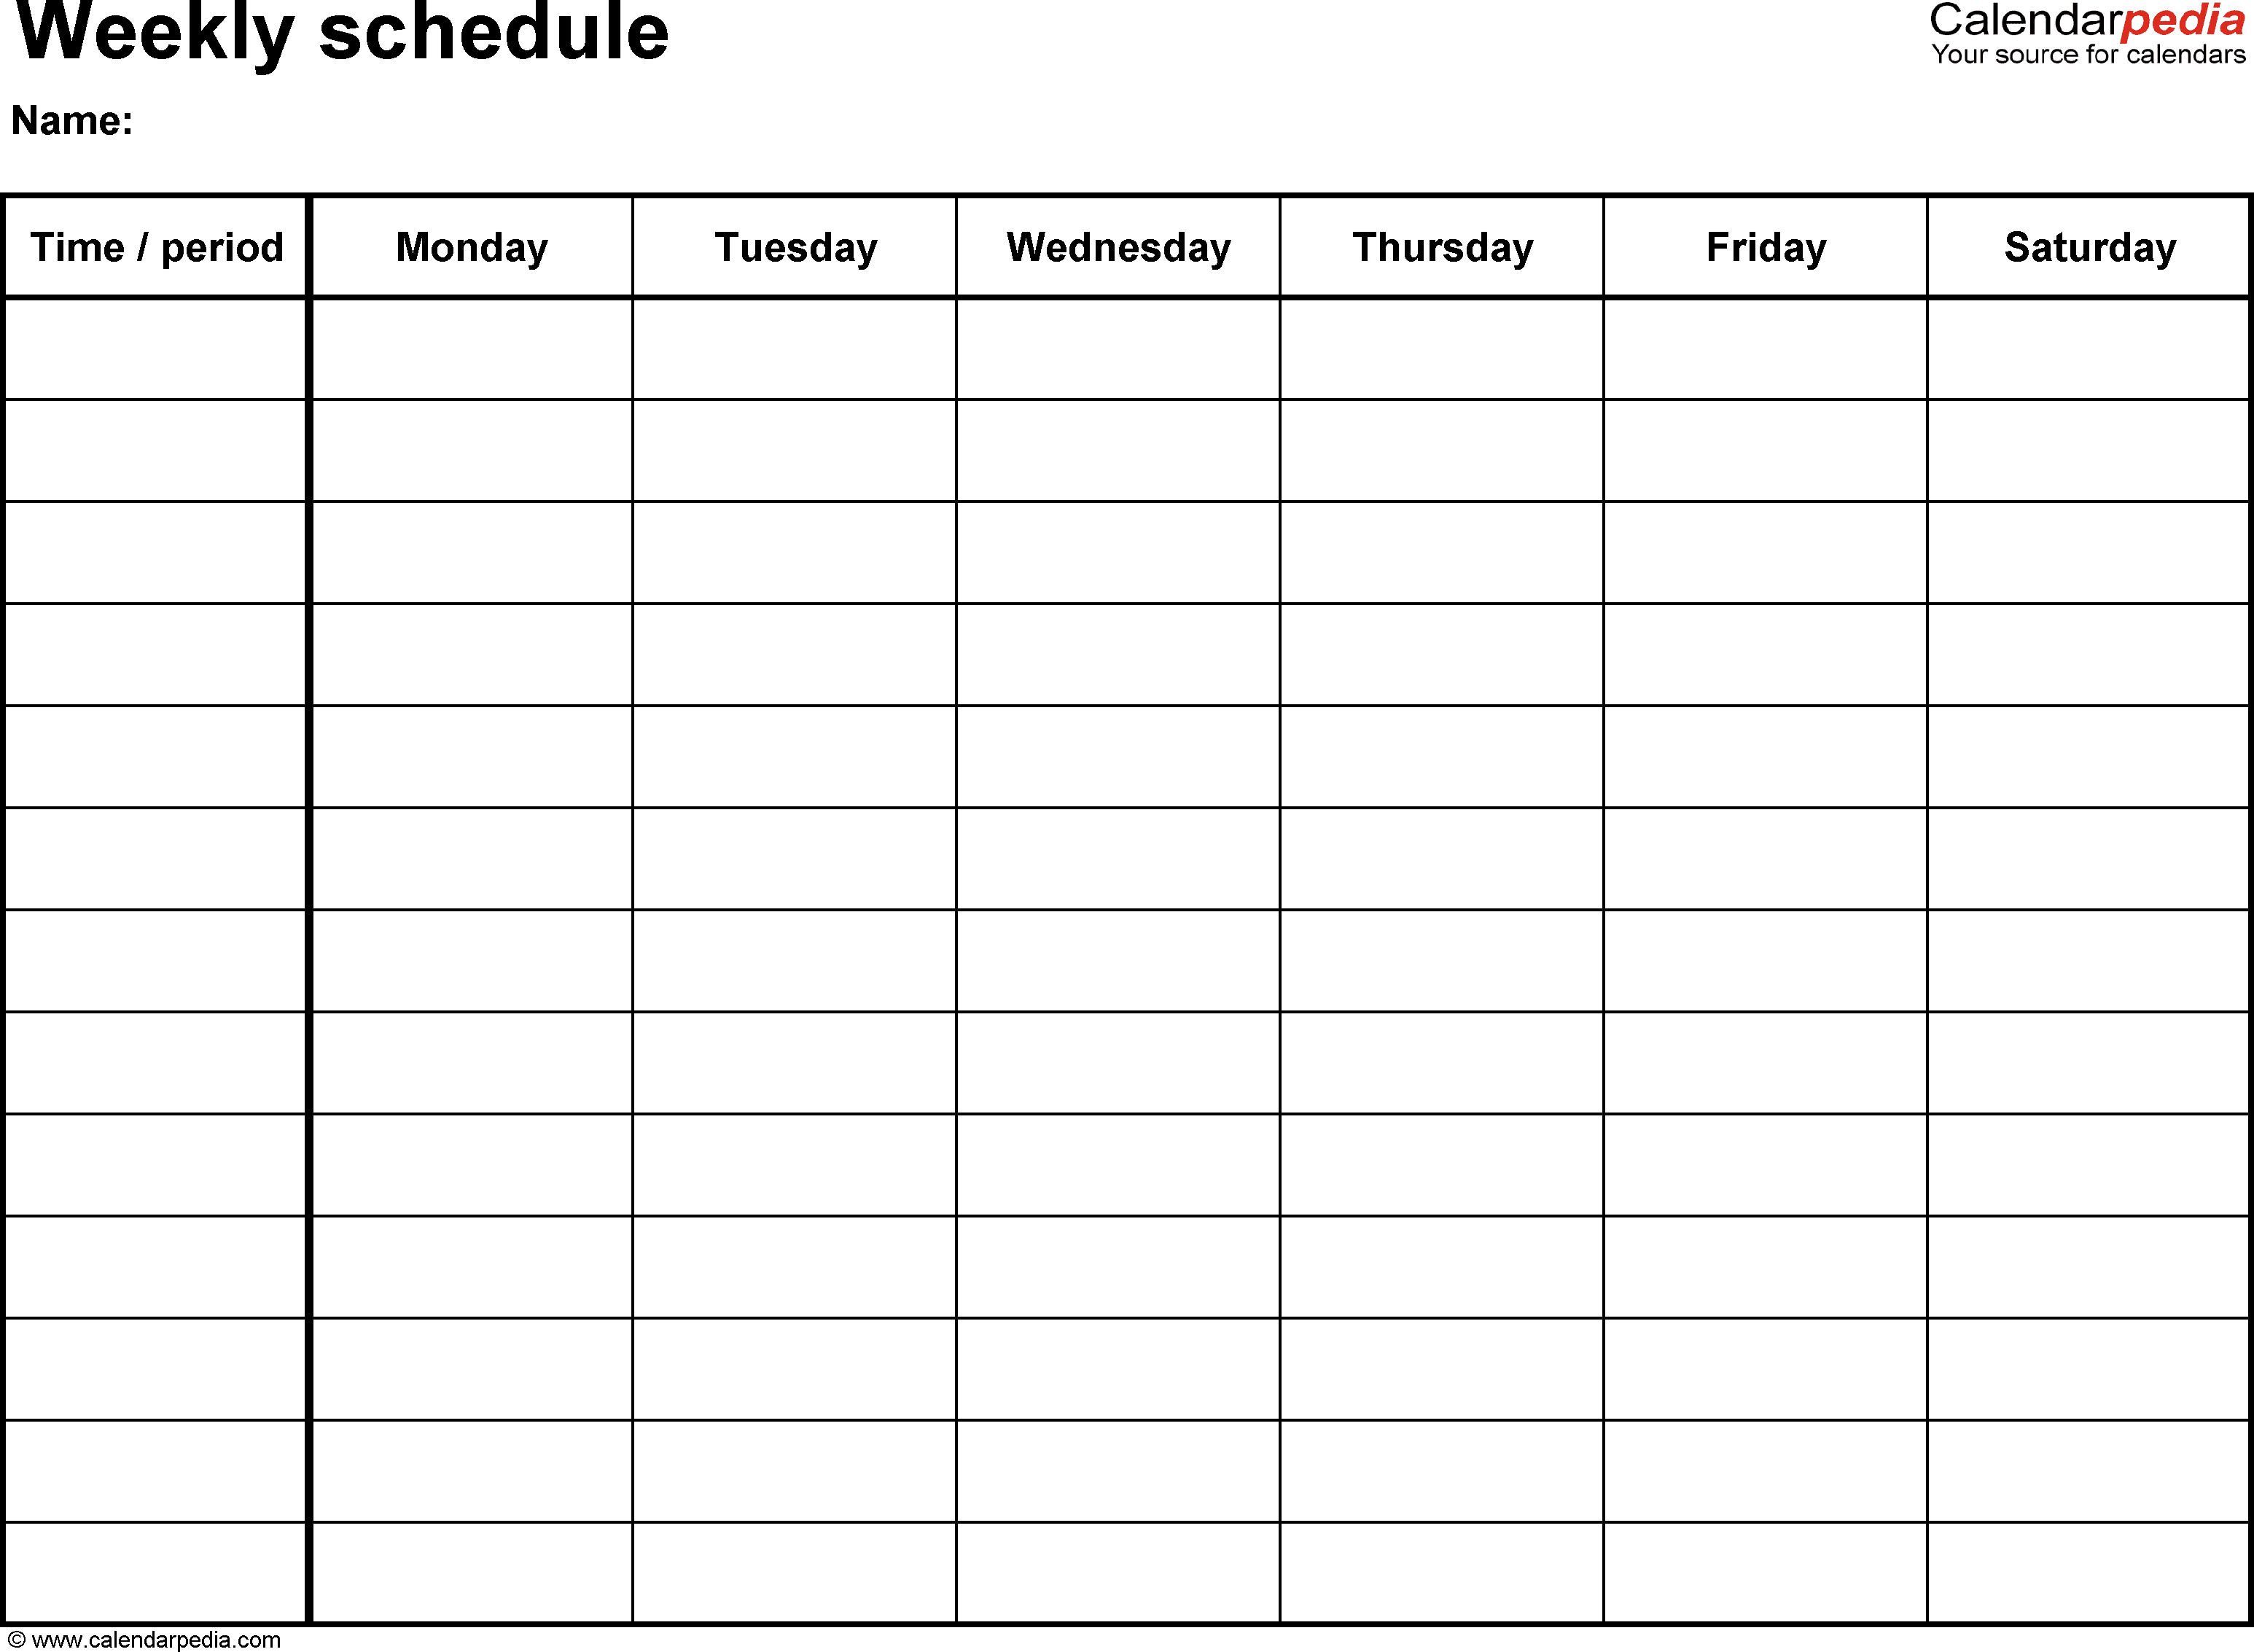 Printable Spreadsheets Made Easy in Free Weekly Schedule Templates For Excel  18 Templates